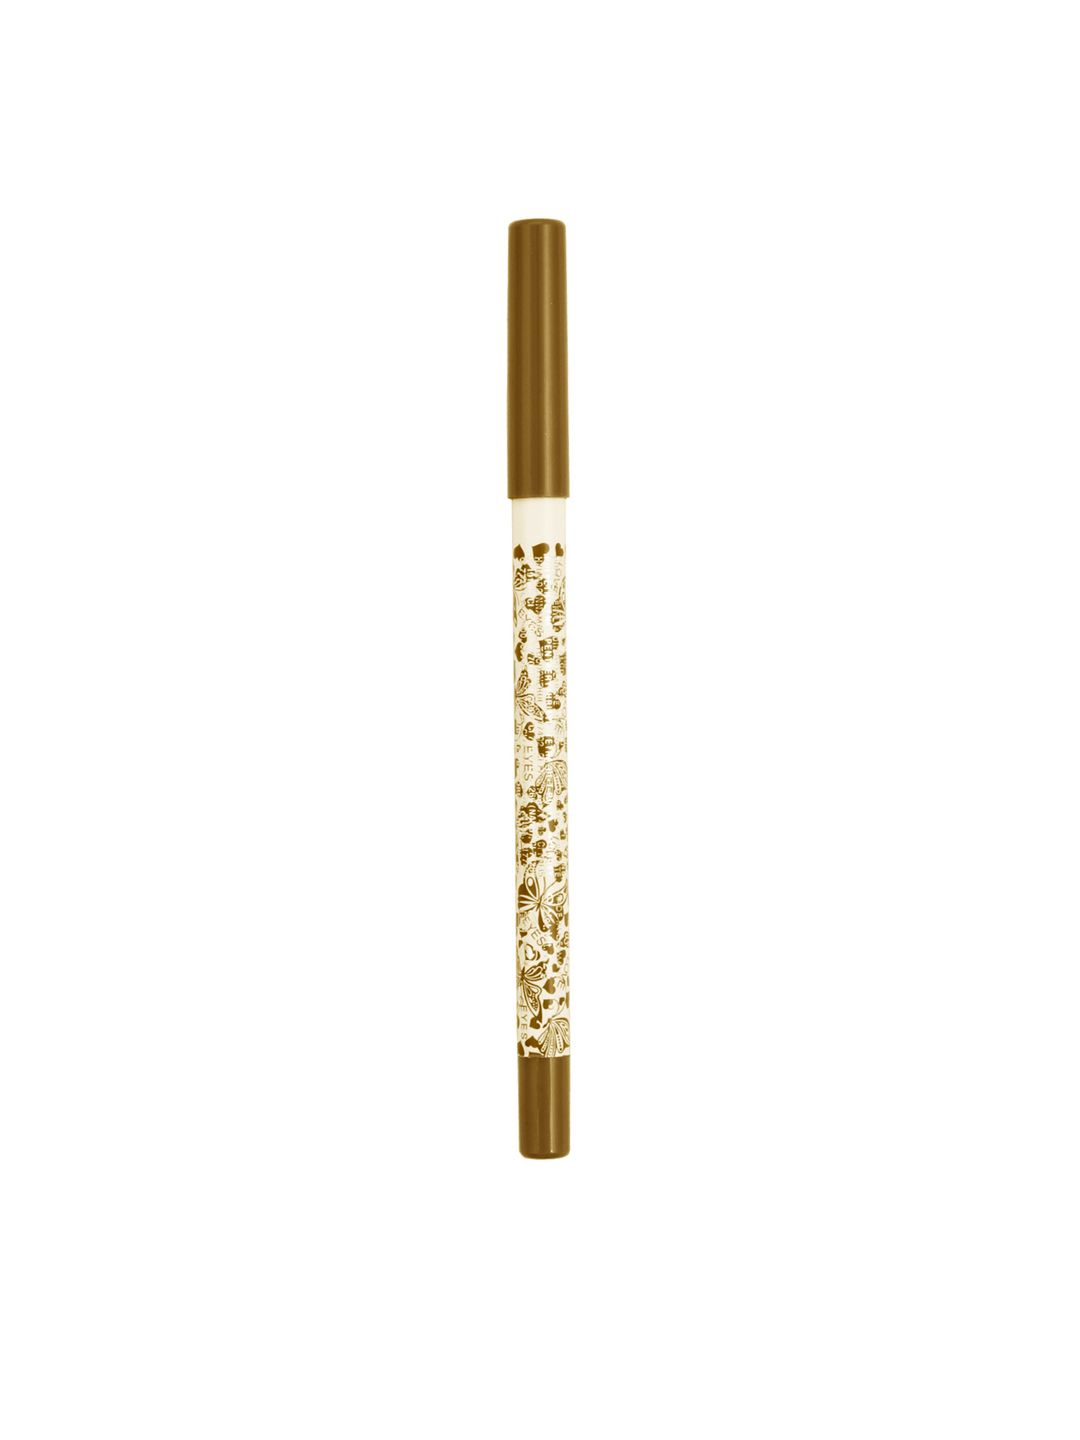 Daily Life Forever52 Gold Waterproof Smoothening Eye Pencil 1.2g Price in India